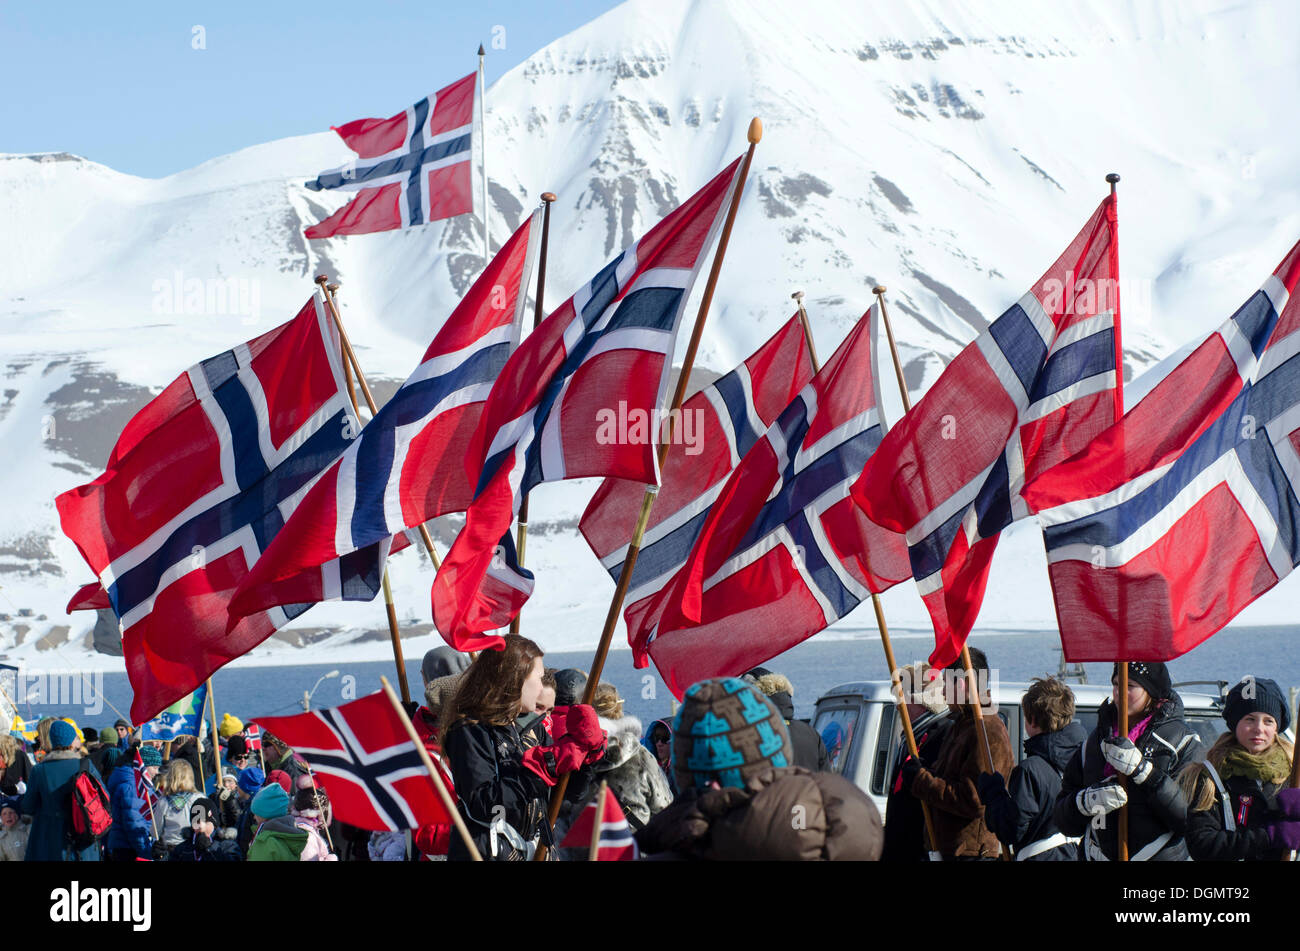 Norwegian national flags on Norwegian National Day, 17th May, being carried through Longyearbyen, Spitsbergen, Svalbard, Norway Stock Photo